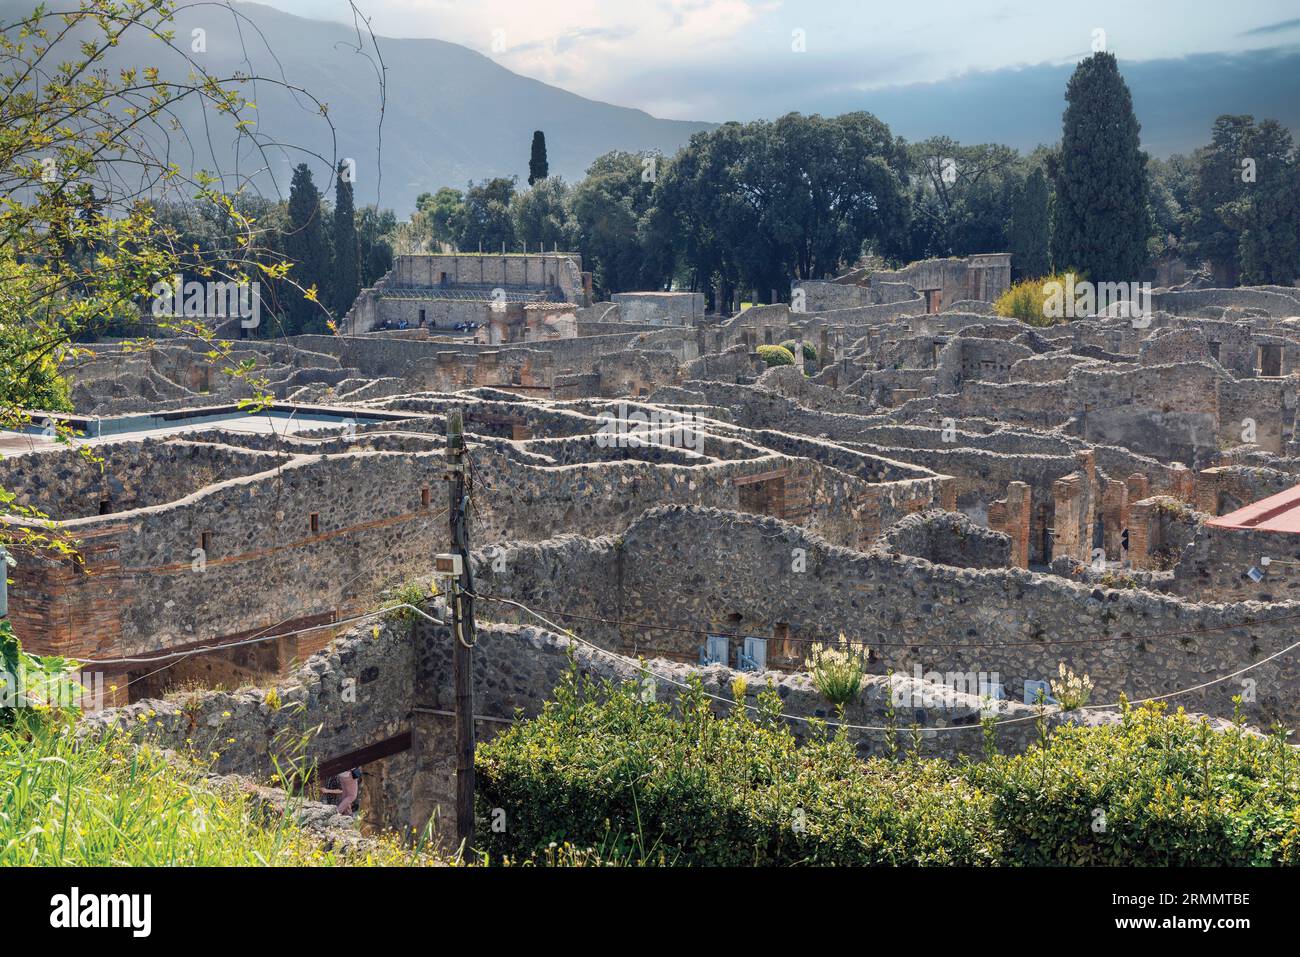 Pompeii Archaeological Site, Campania, Italy.  Overall view of part of the excavated ruins.  Pompeii, Herculaneum, and Torre Annunziata are collective Stock Photo